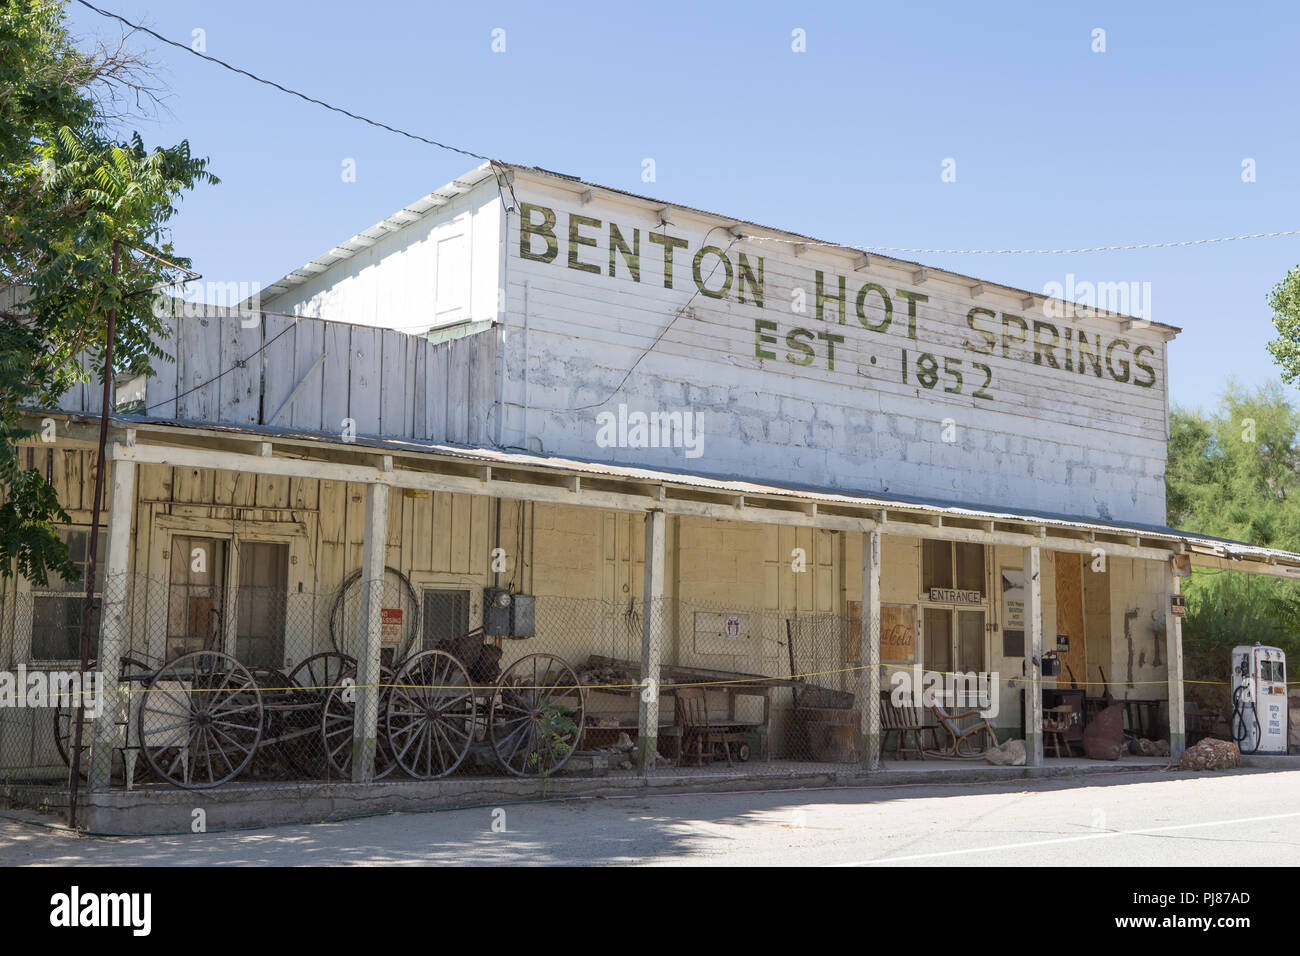 Exterior view of Benton Hot springs old general store and Former Wells Fargo Agency building on Highway 120 California USA Stock Photo